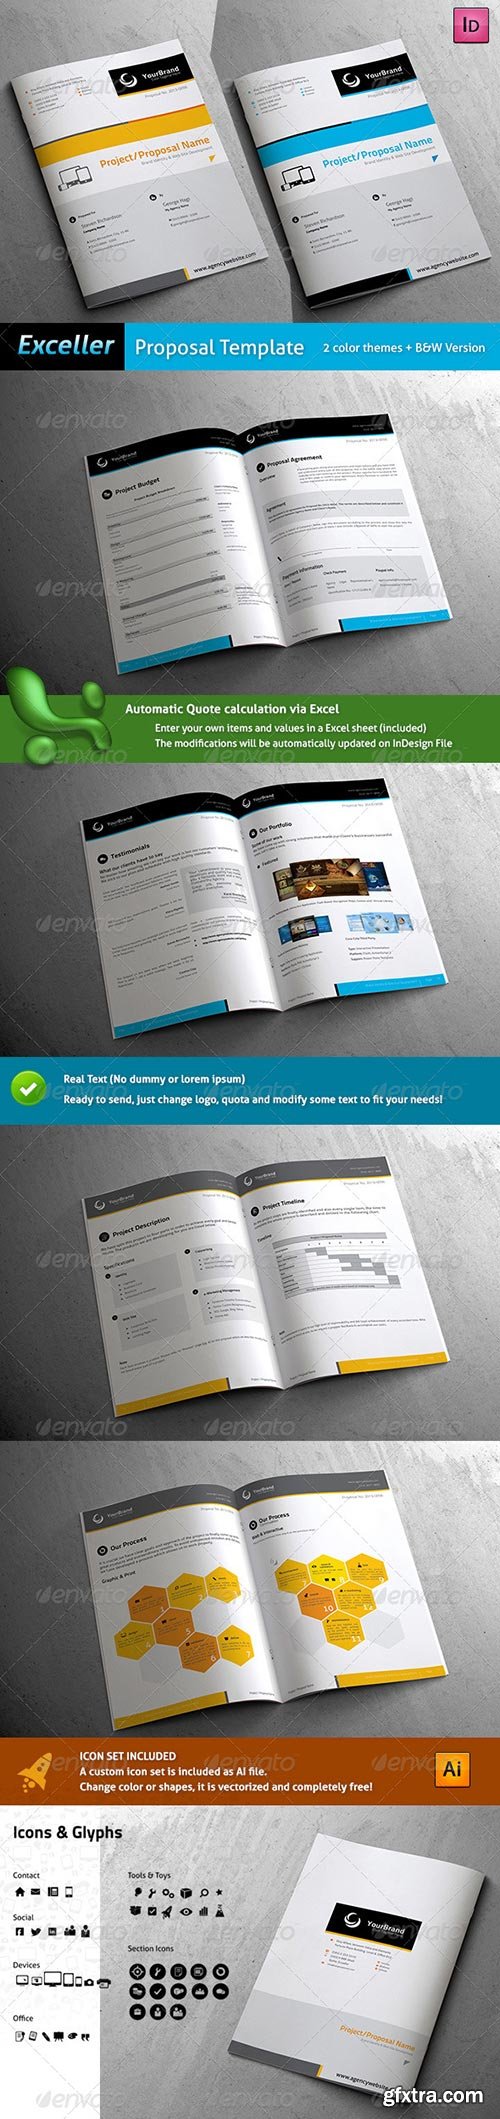 GraphicRiver - Exceller Proposal Template